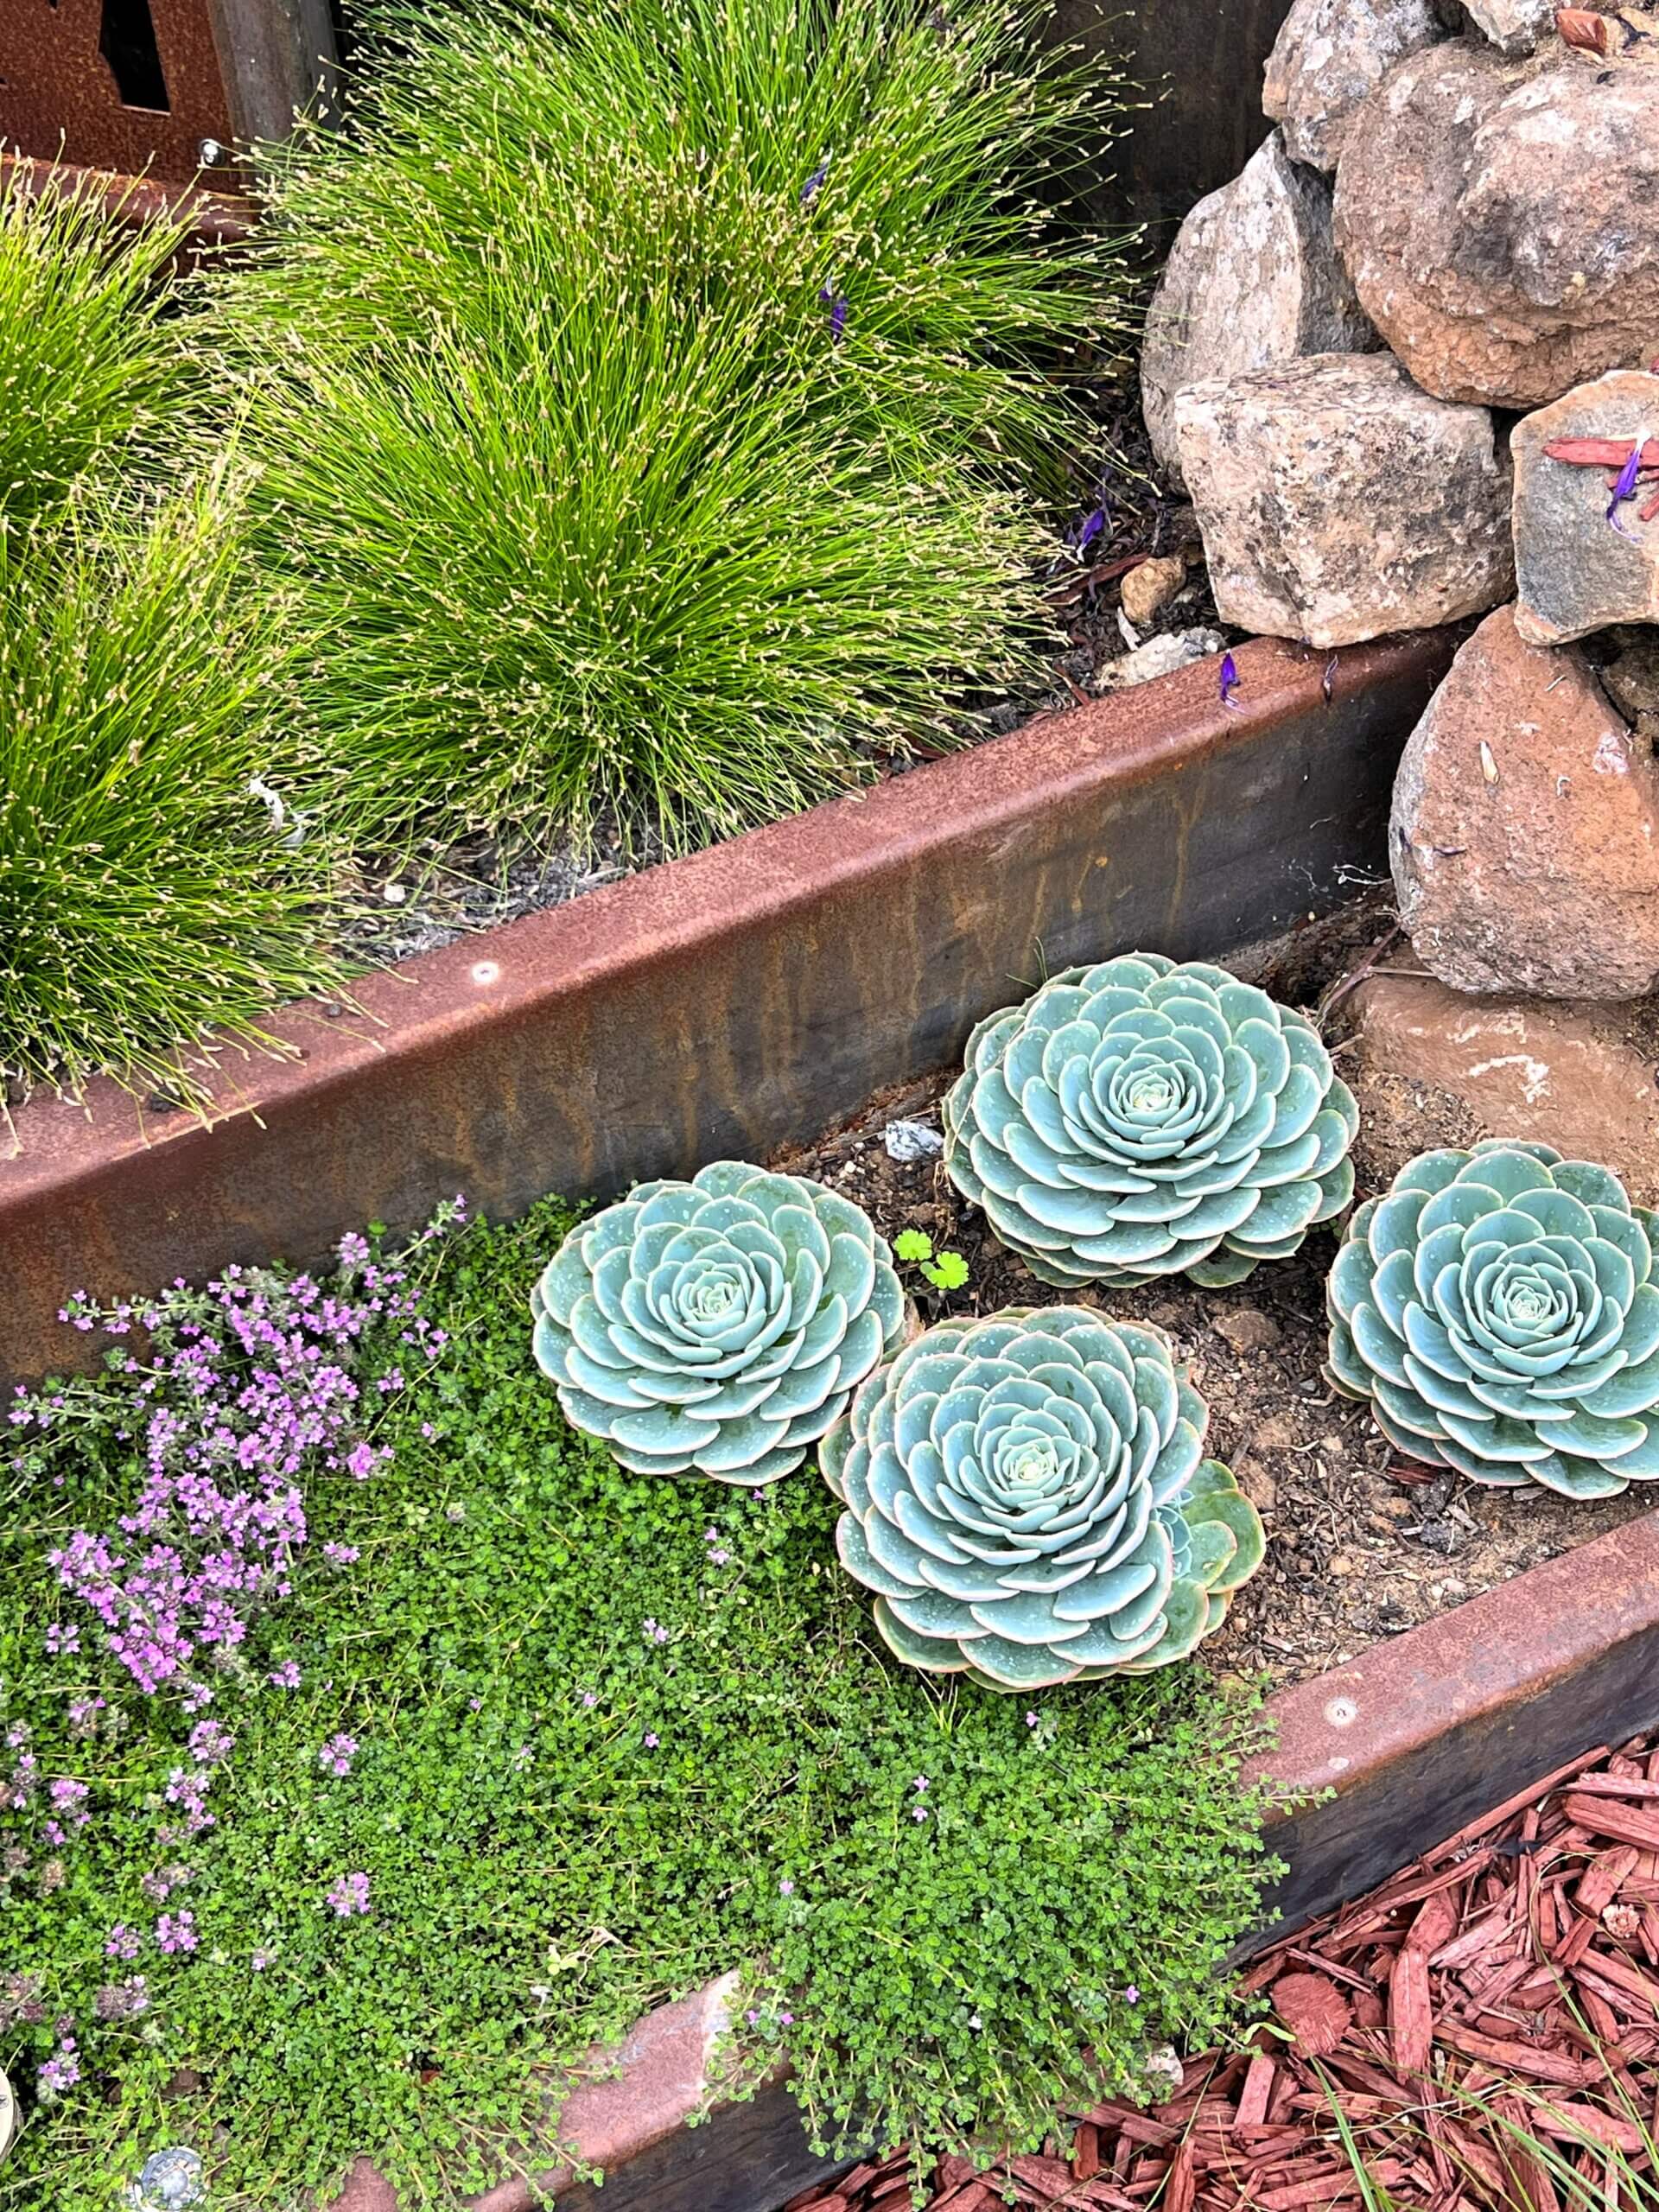 Succulents and low ground cover in terraced garden bed